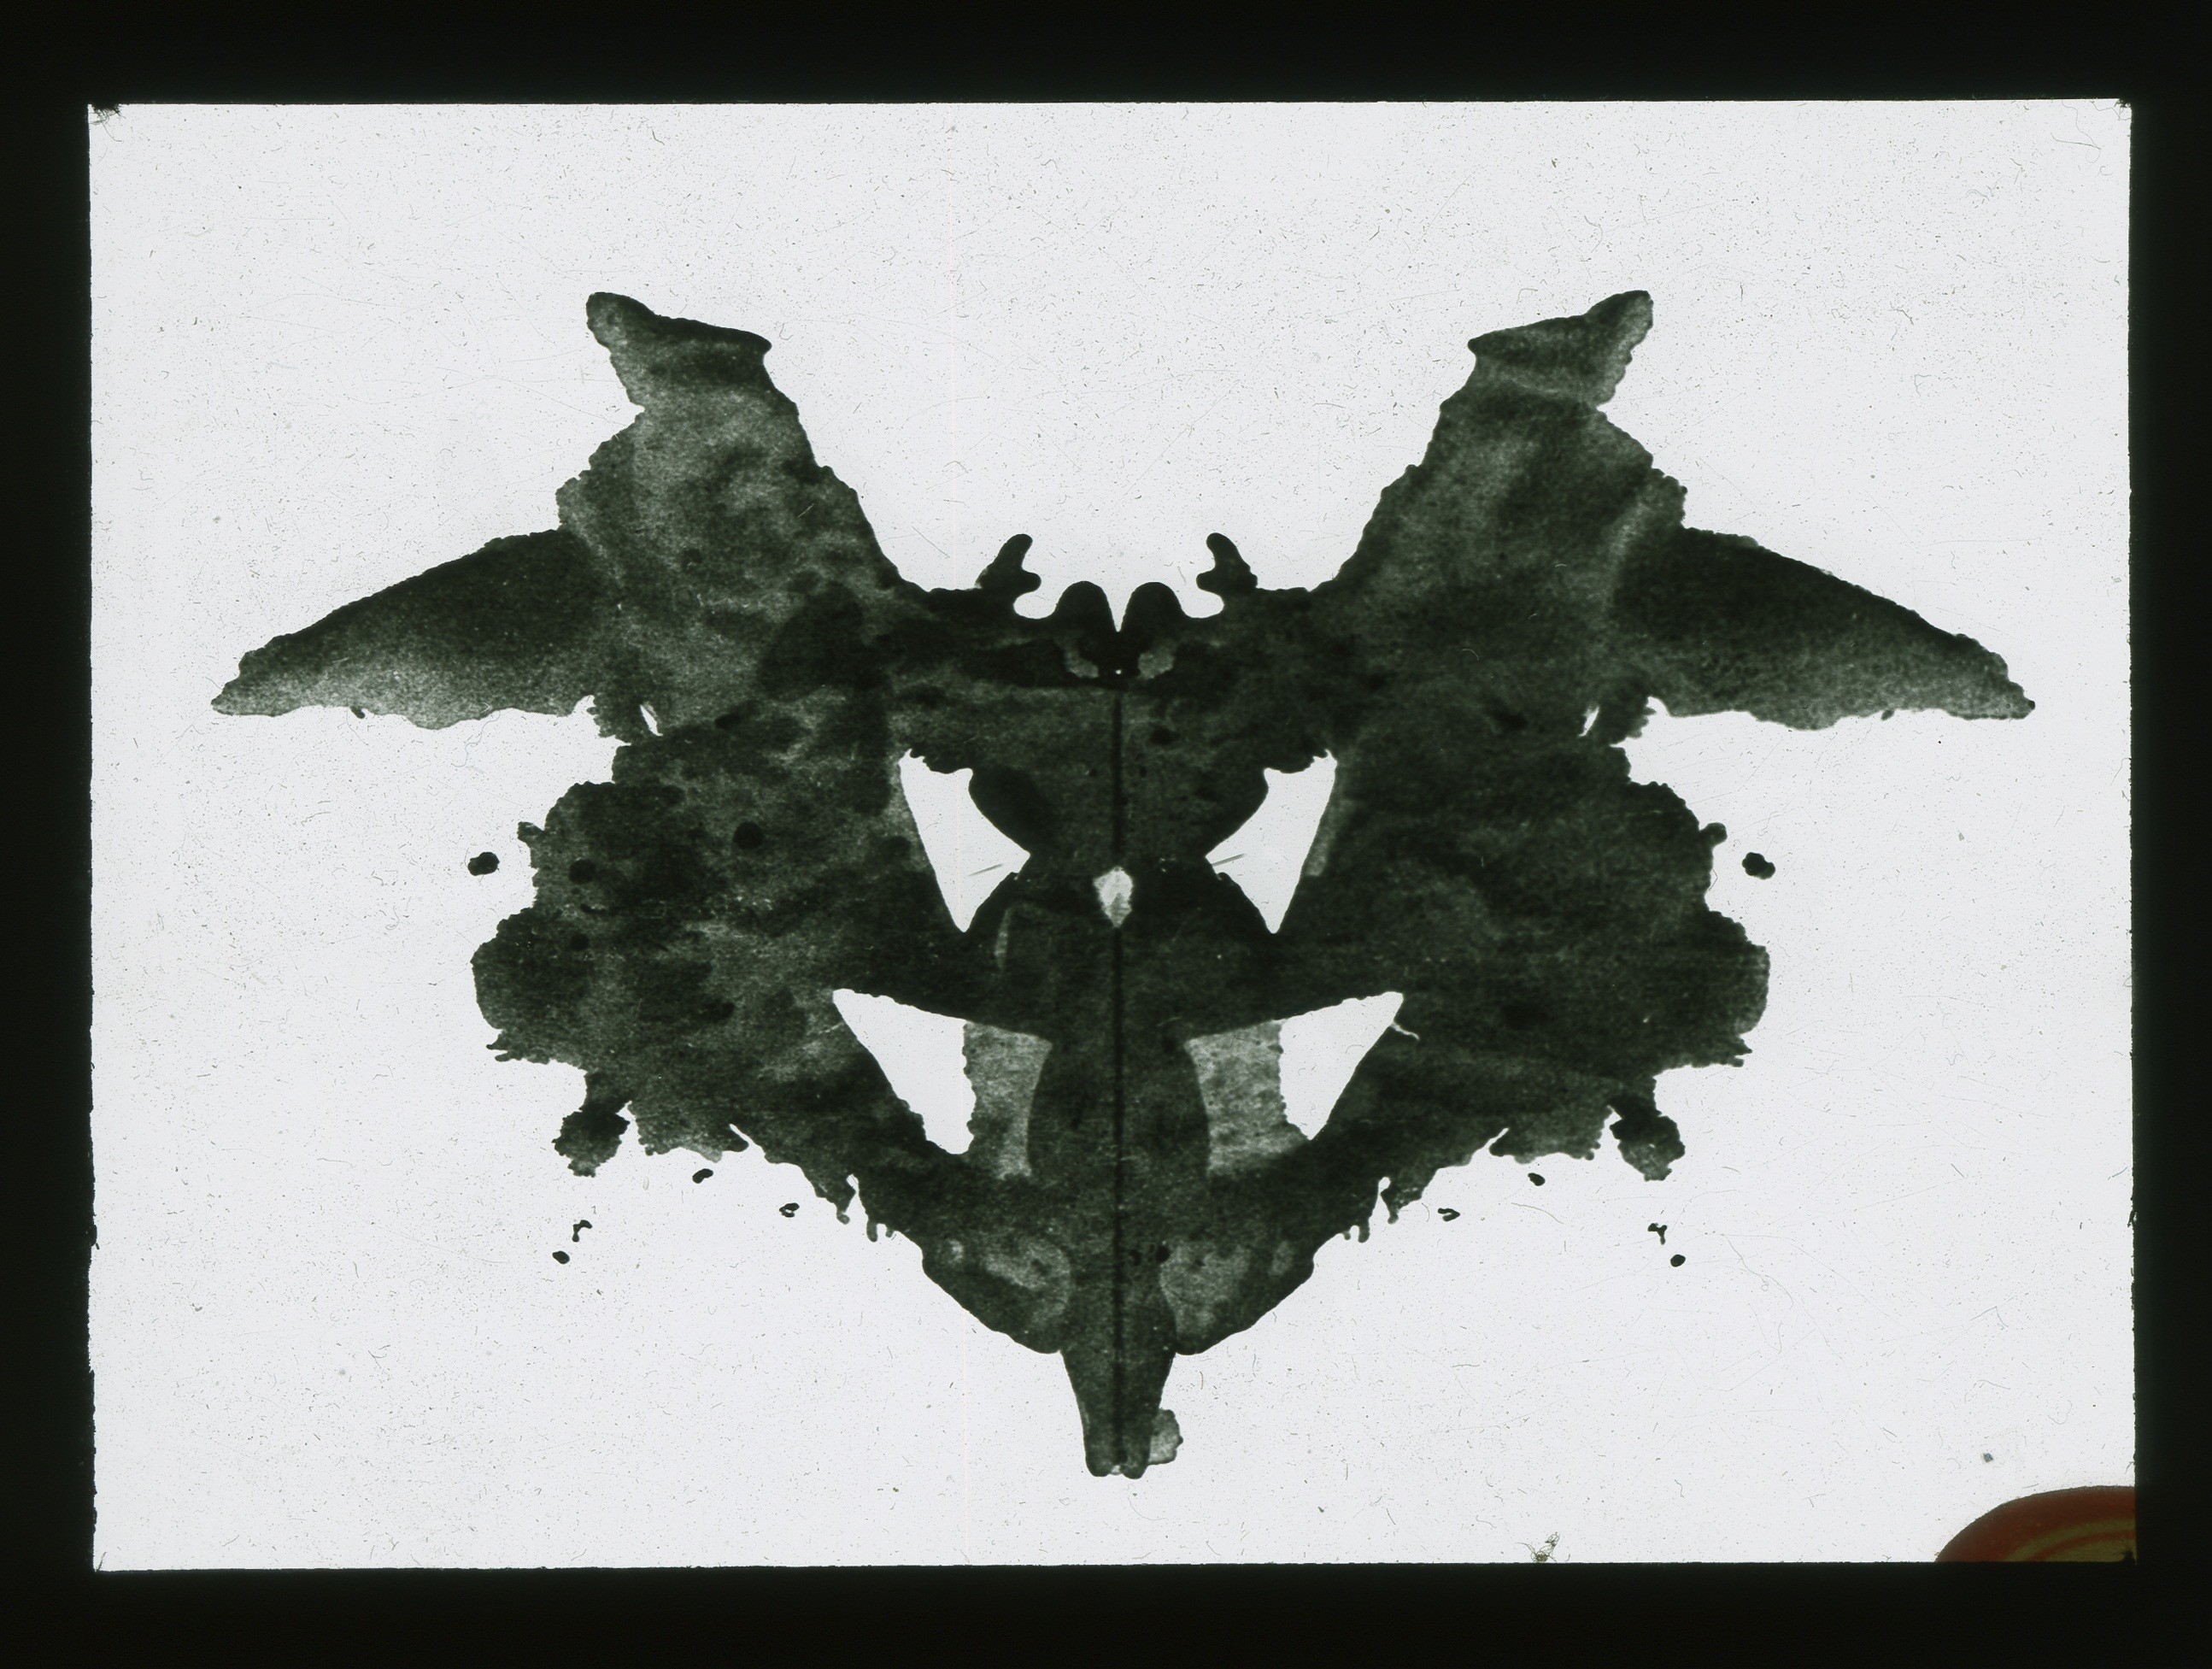 2589x1953 A physician named Hermann Rorschach developed the Rorschach test, one of  psychology's best-known